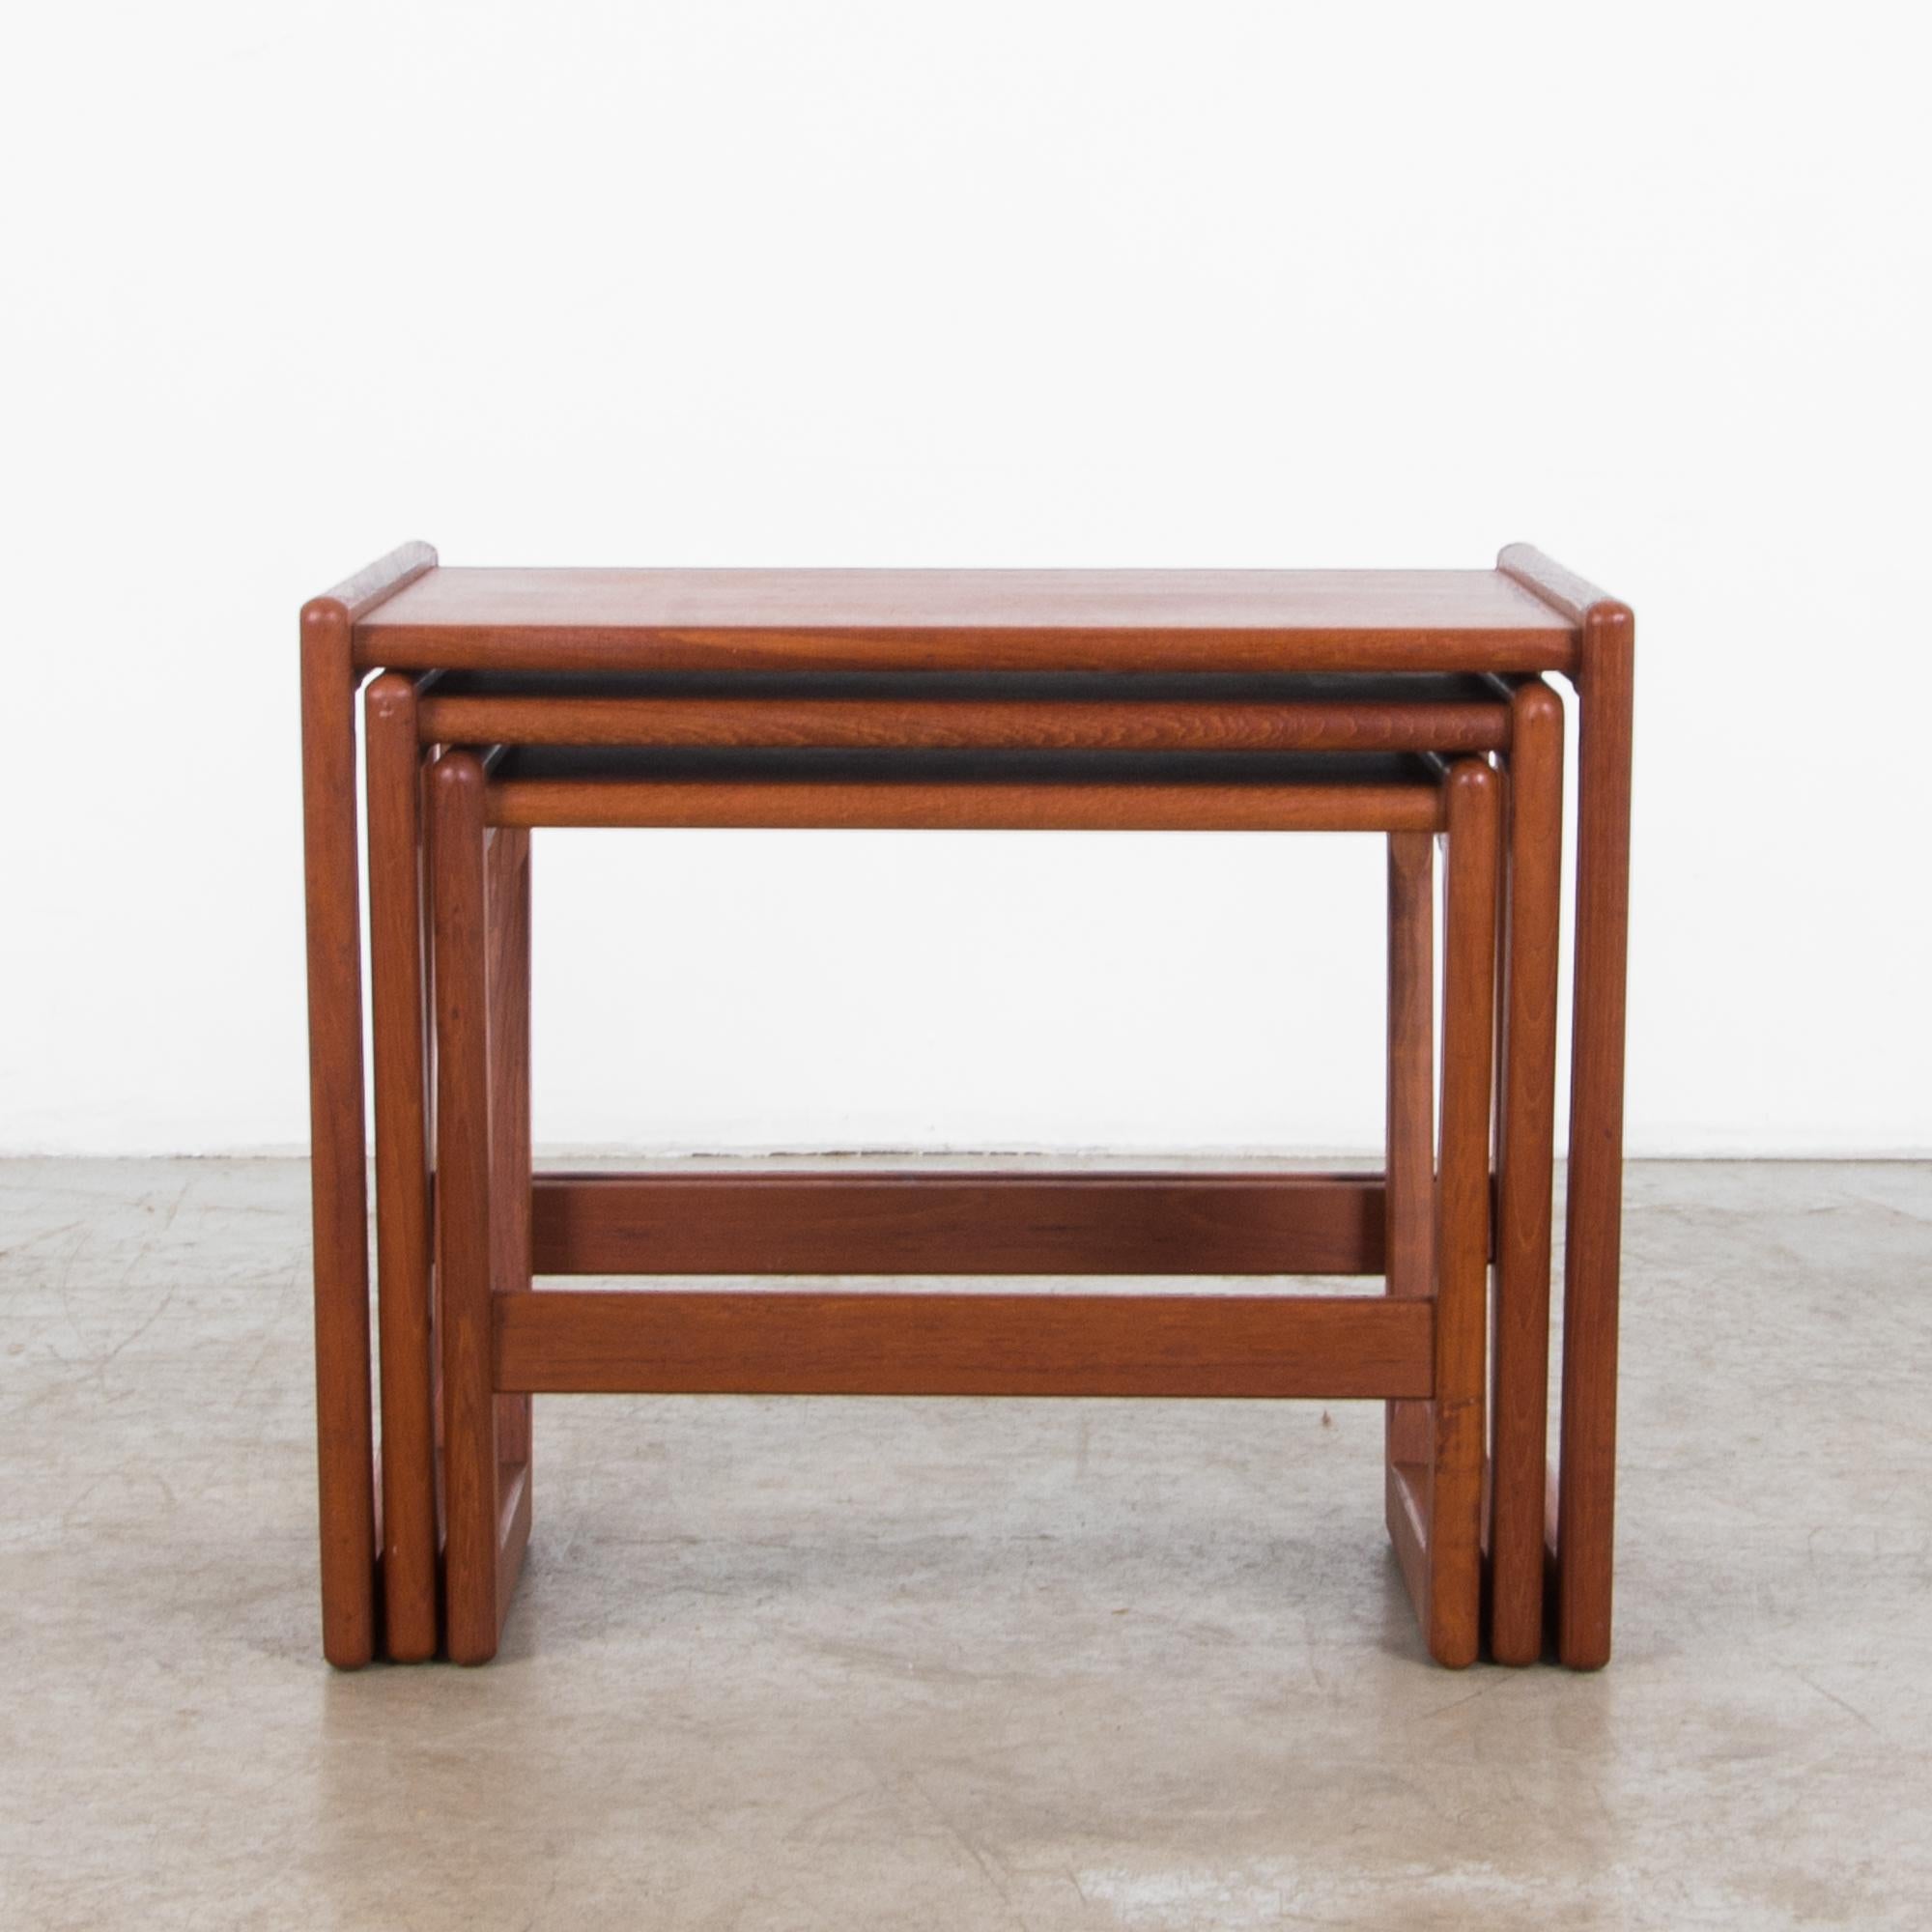 This set of wooden nesting tables, designed in Denmark in the 1970s, features geometric legs in a playful nesting configuration. The simplicity of the design is a stamp of Scandinavian Modernism, as is the attention to craftsmanship. Rounded edges